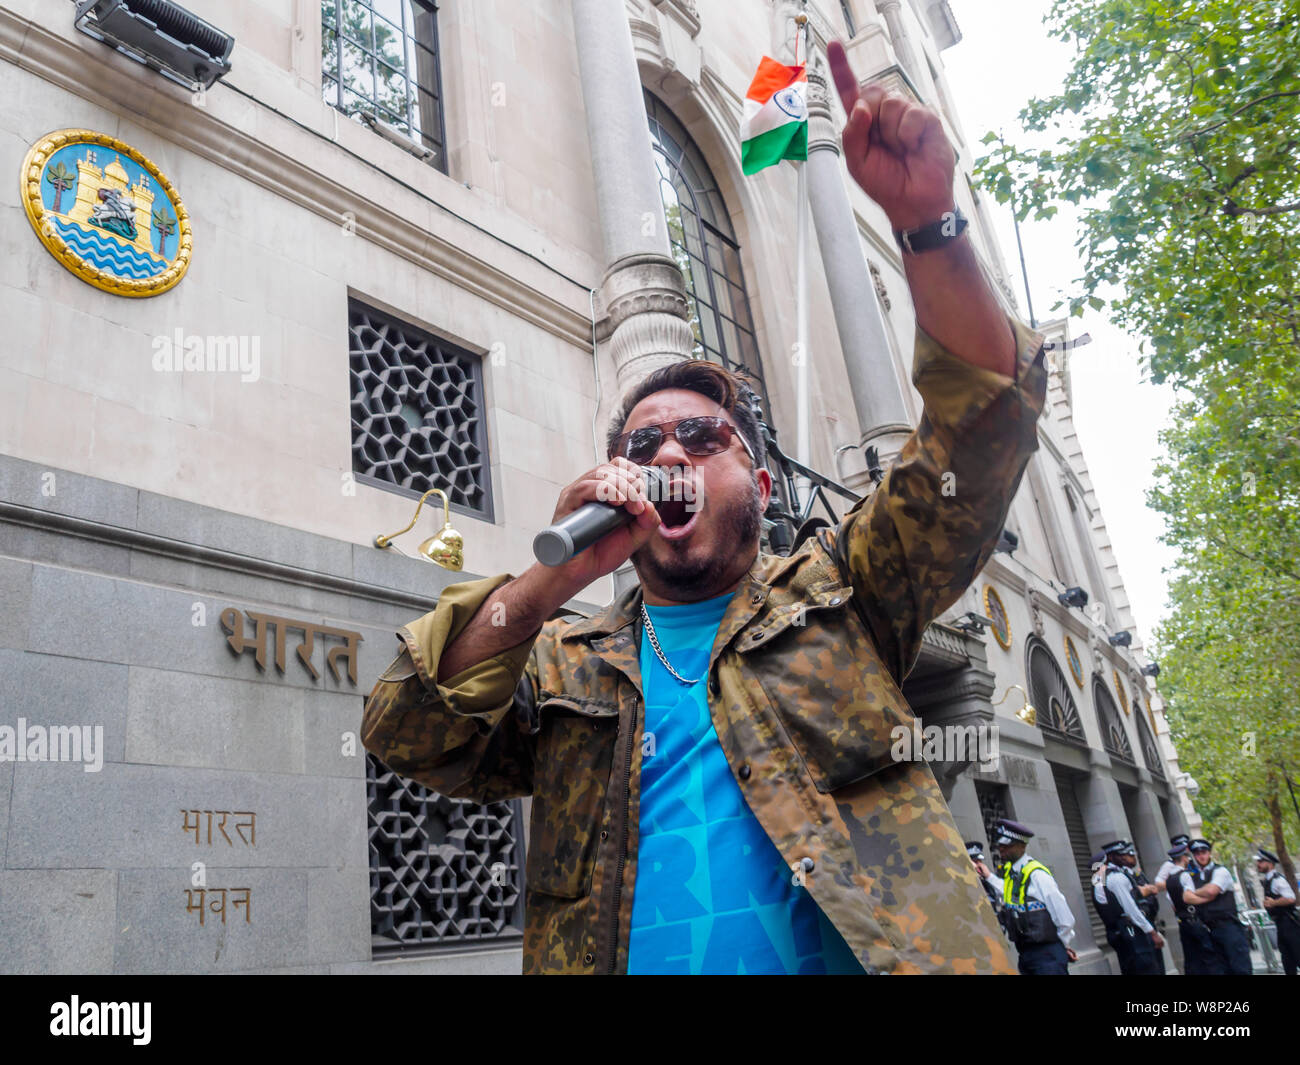 London, UK. 10th August 2019. A man speaks at the Kashmiri protest outside India House after India's President Modi revoked Article 370 of the Indian Constitution which guaranteed significant autonomy to the Muslim-majority state of Kashmir after the Independence partition of India and Pakistan. Kashmiris have been calling for independence, with armed revolt since 1989 suppressed by torture, deliberate blinding and killings by a huge Indian occupying force. They call Modi a Hindu fascist who has united the country against India. Later they protested in Trafalgar Square. Peter Marshall/Alamy L Stock Photo